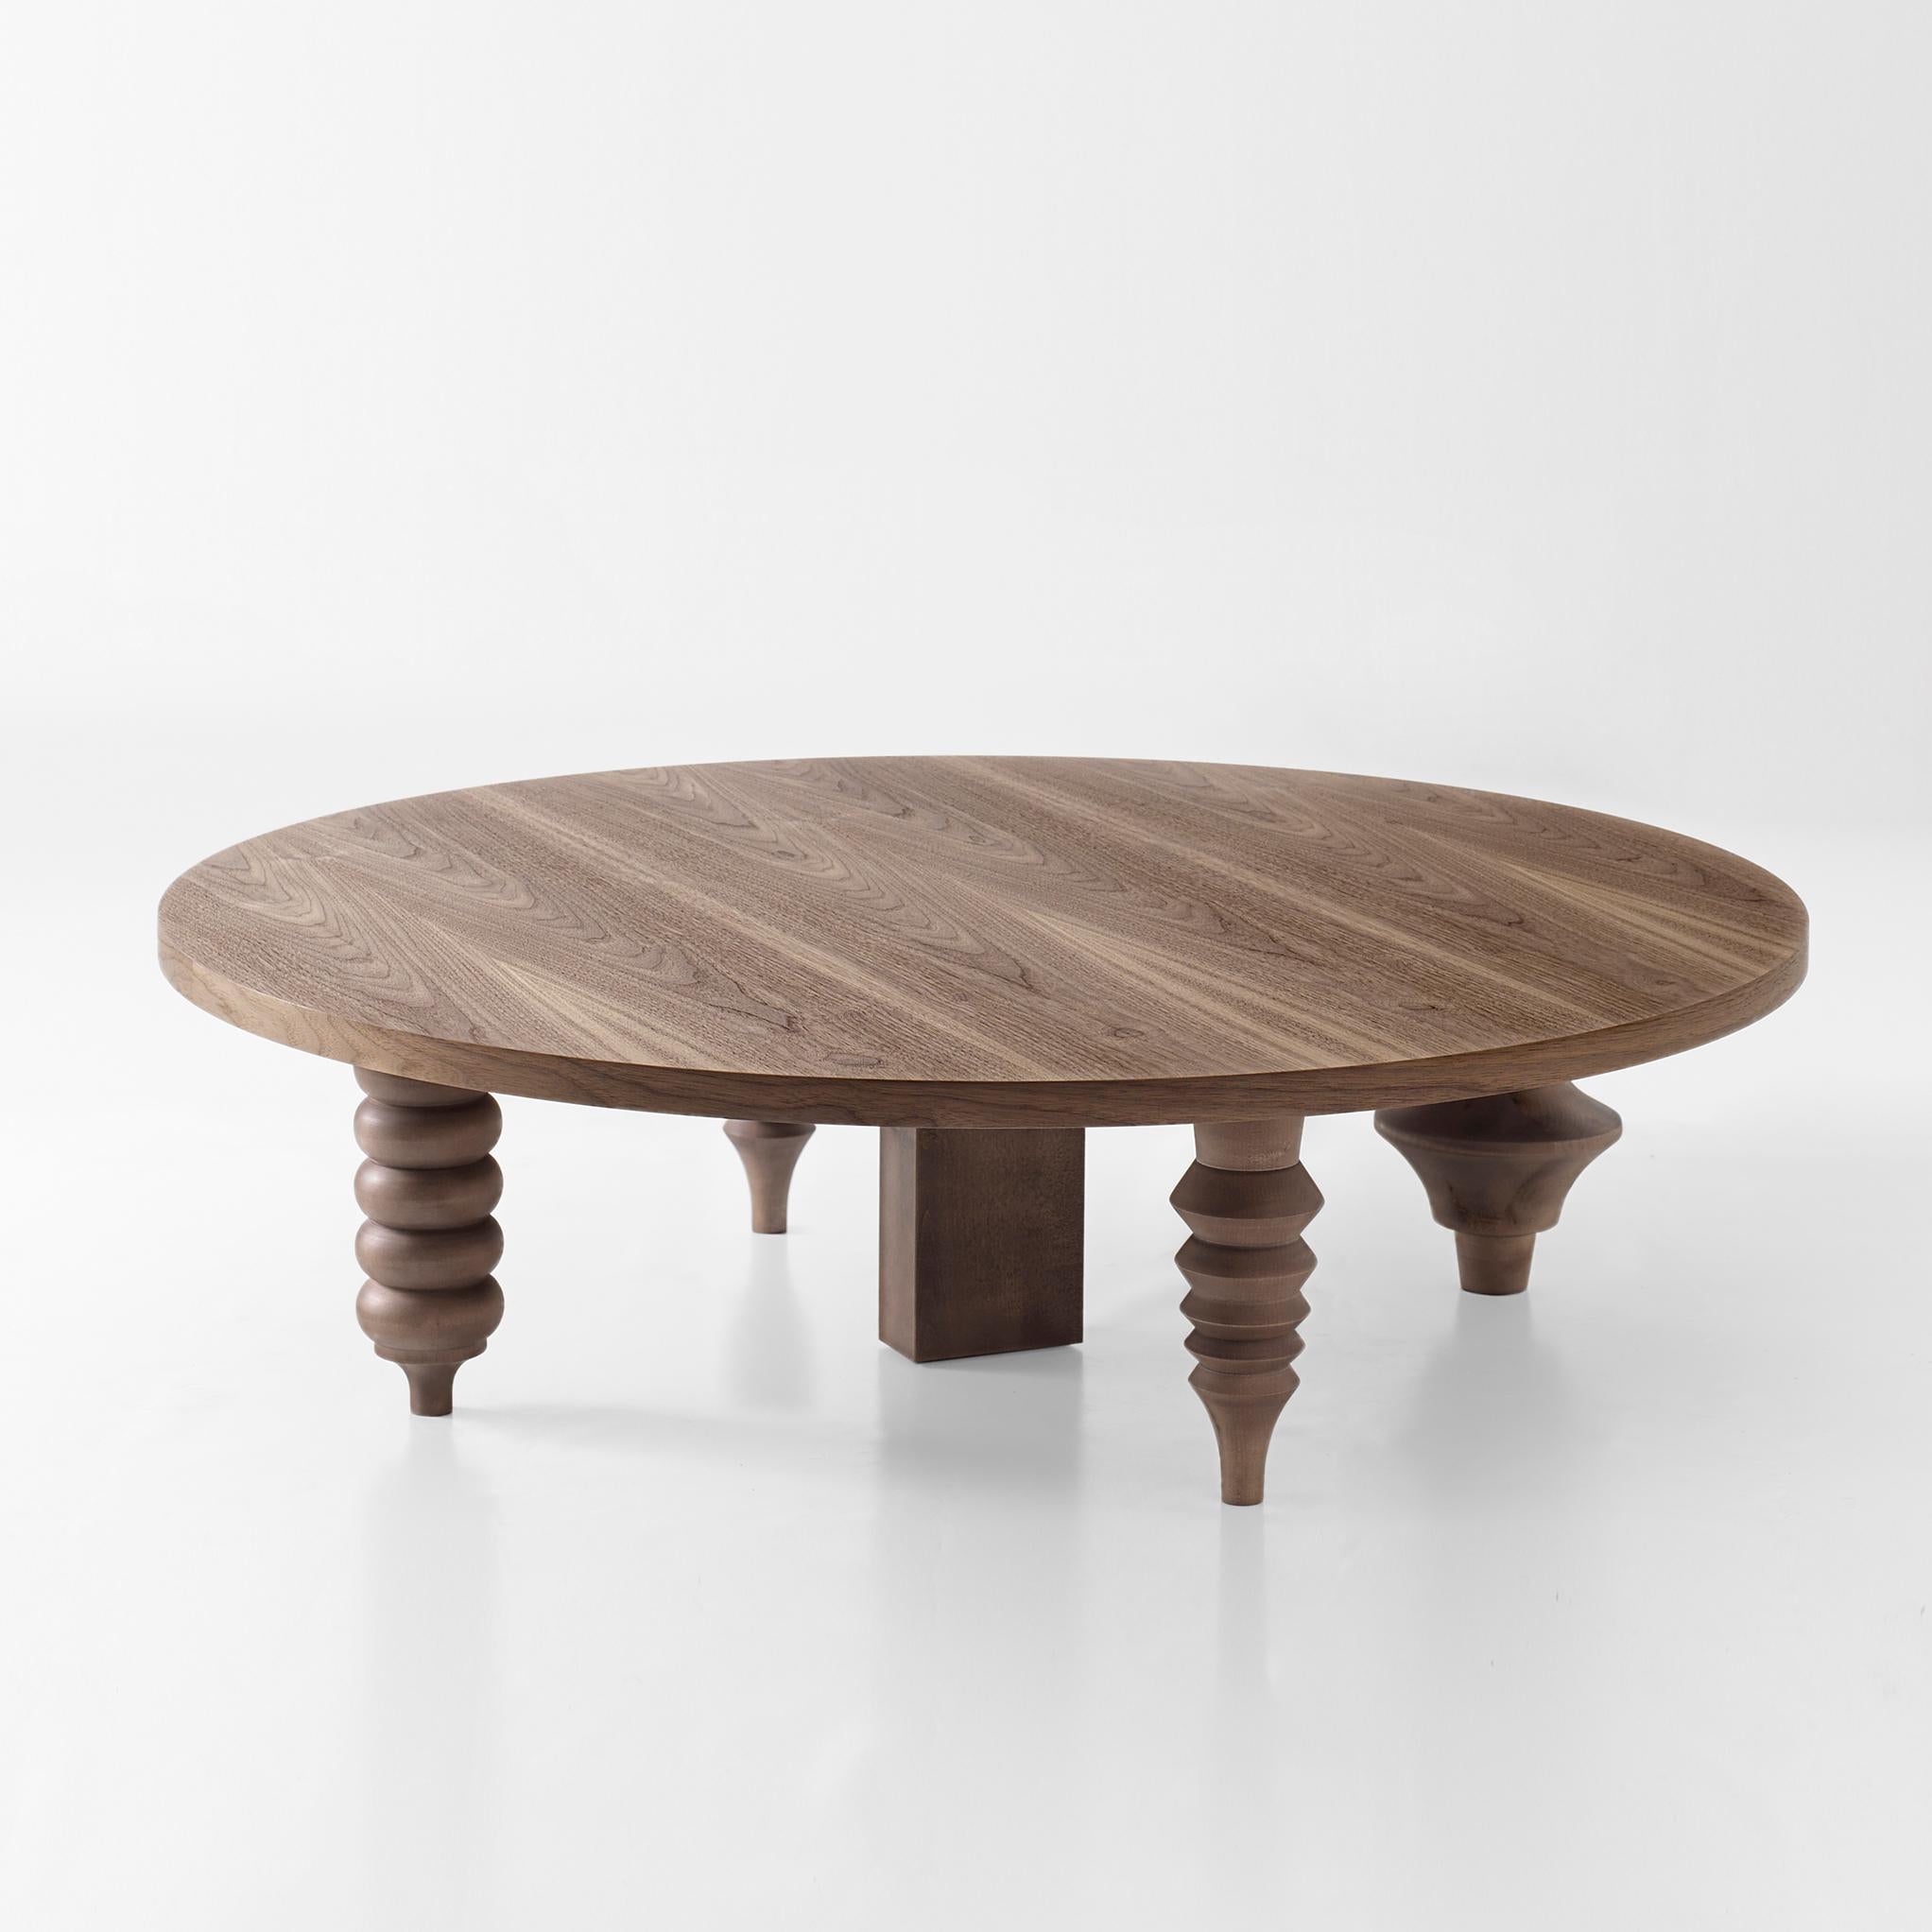 Spanish Jaime Hayon Rounded Multi Leg Low Table by BD Barcelona